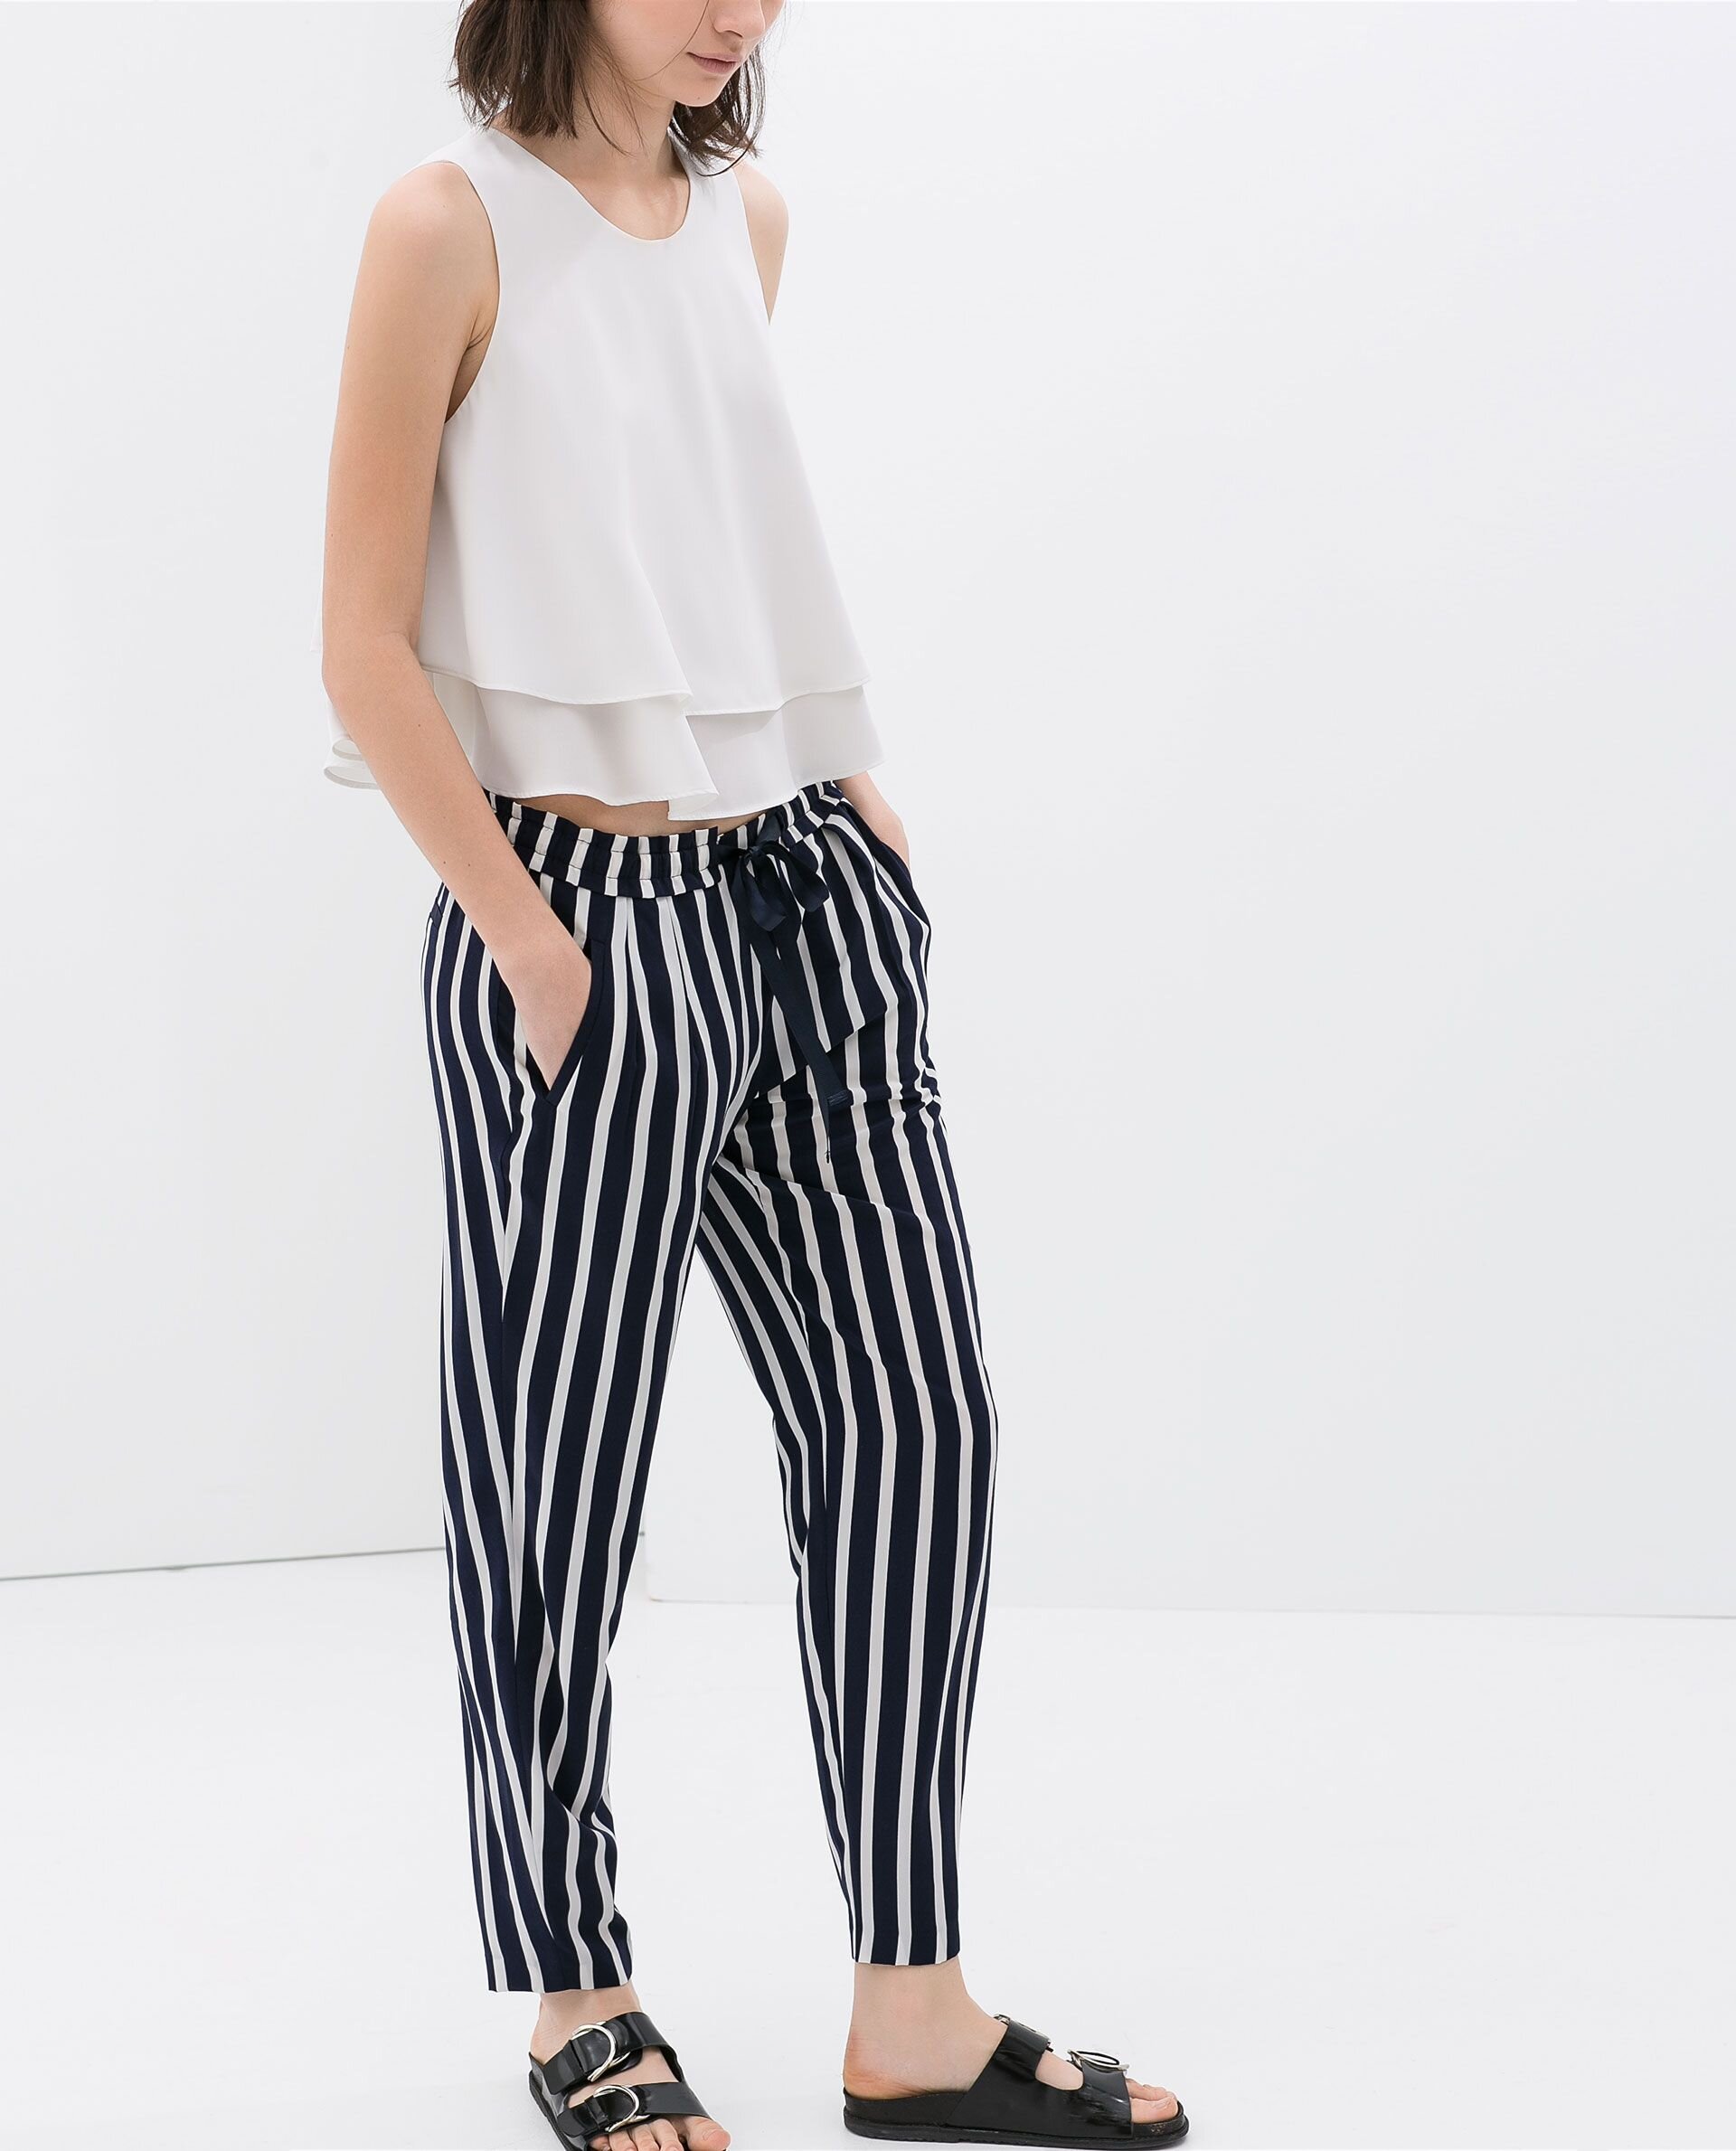 Zara Striped Trousers With Laces.jpg